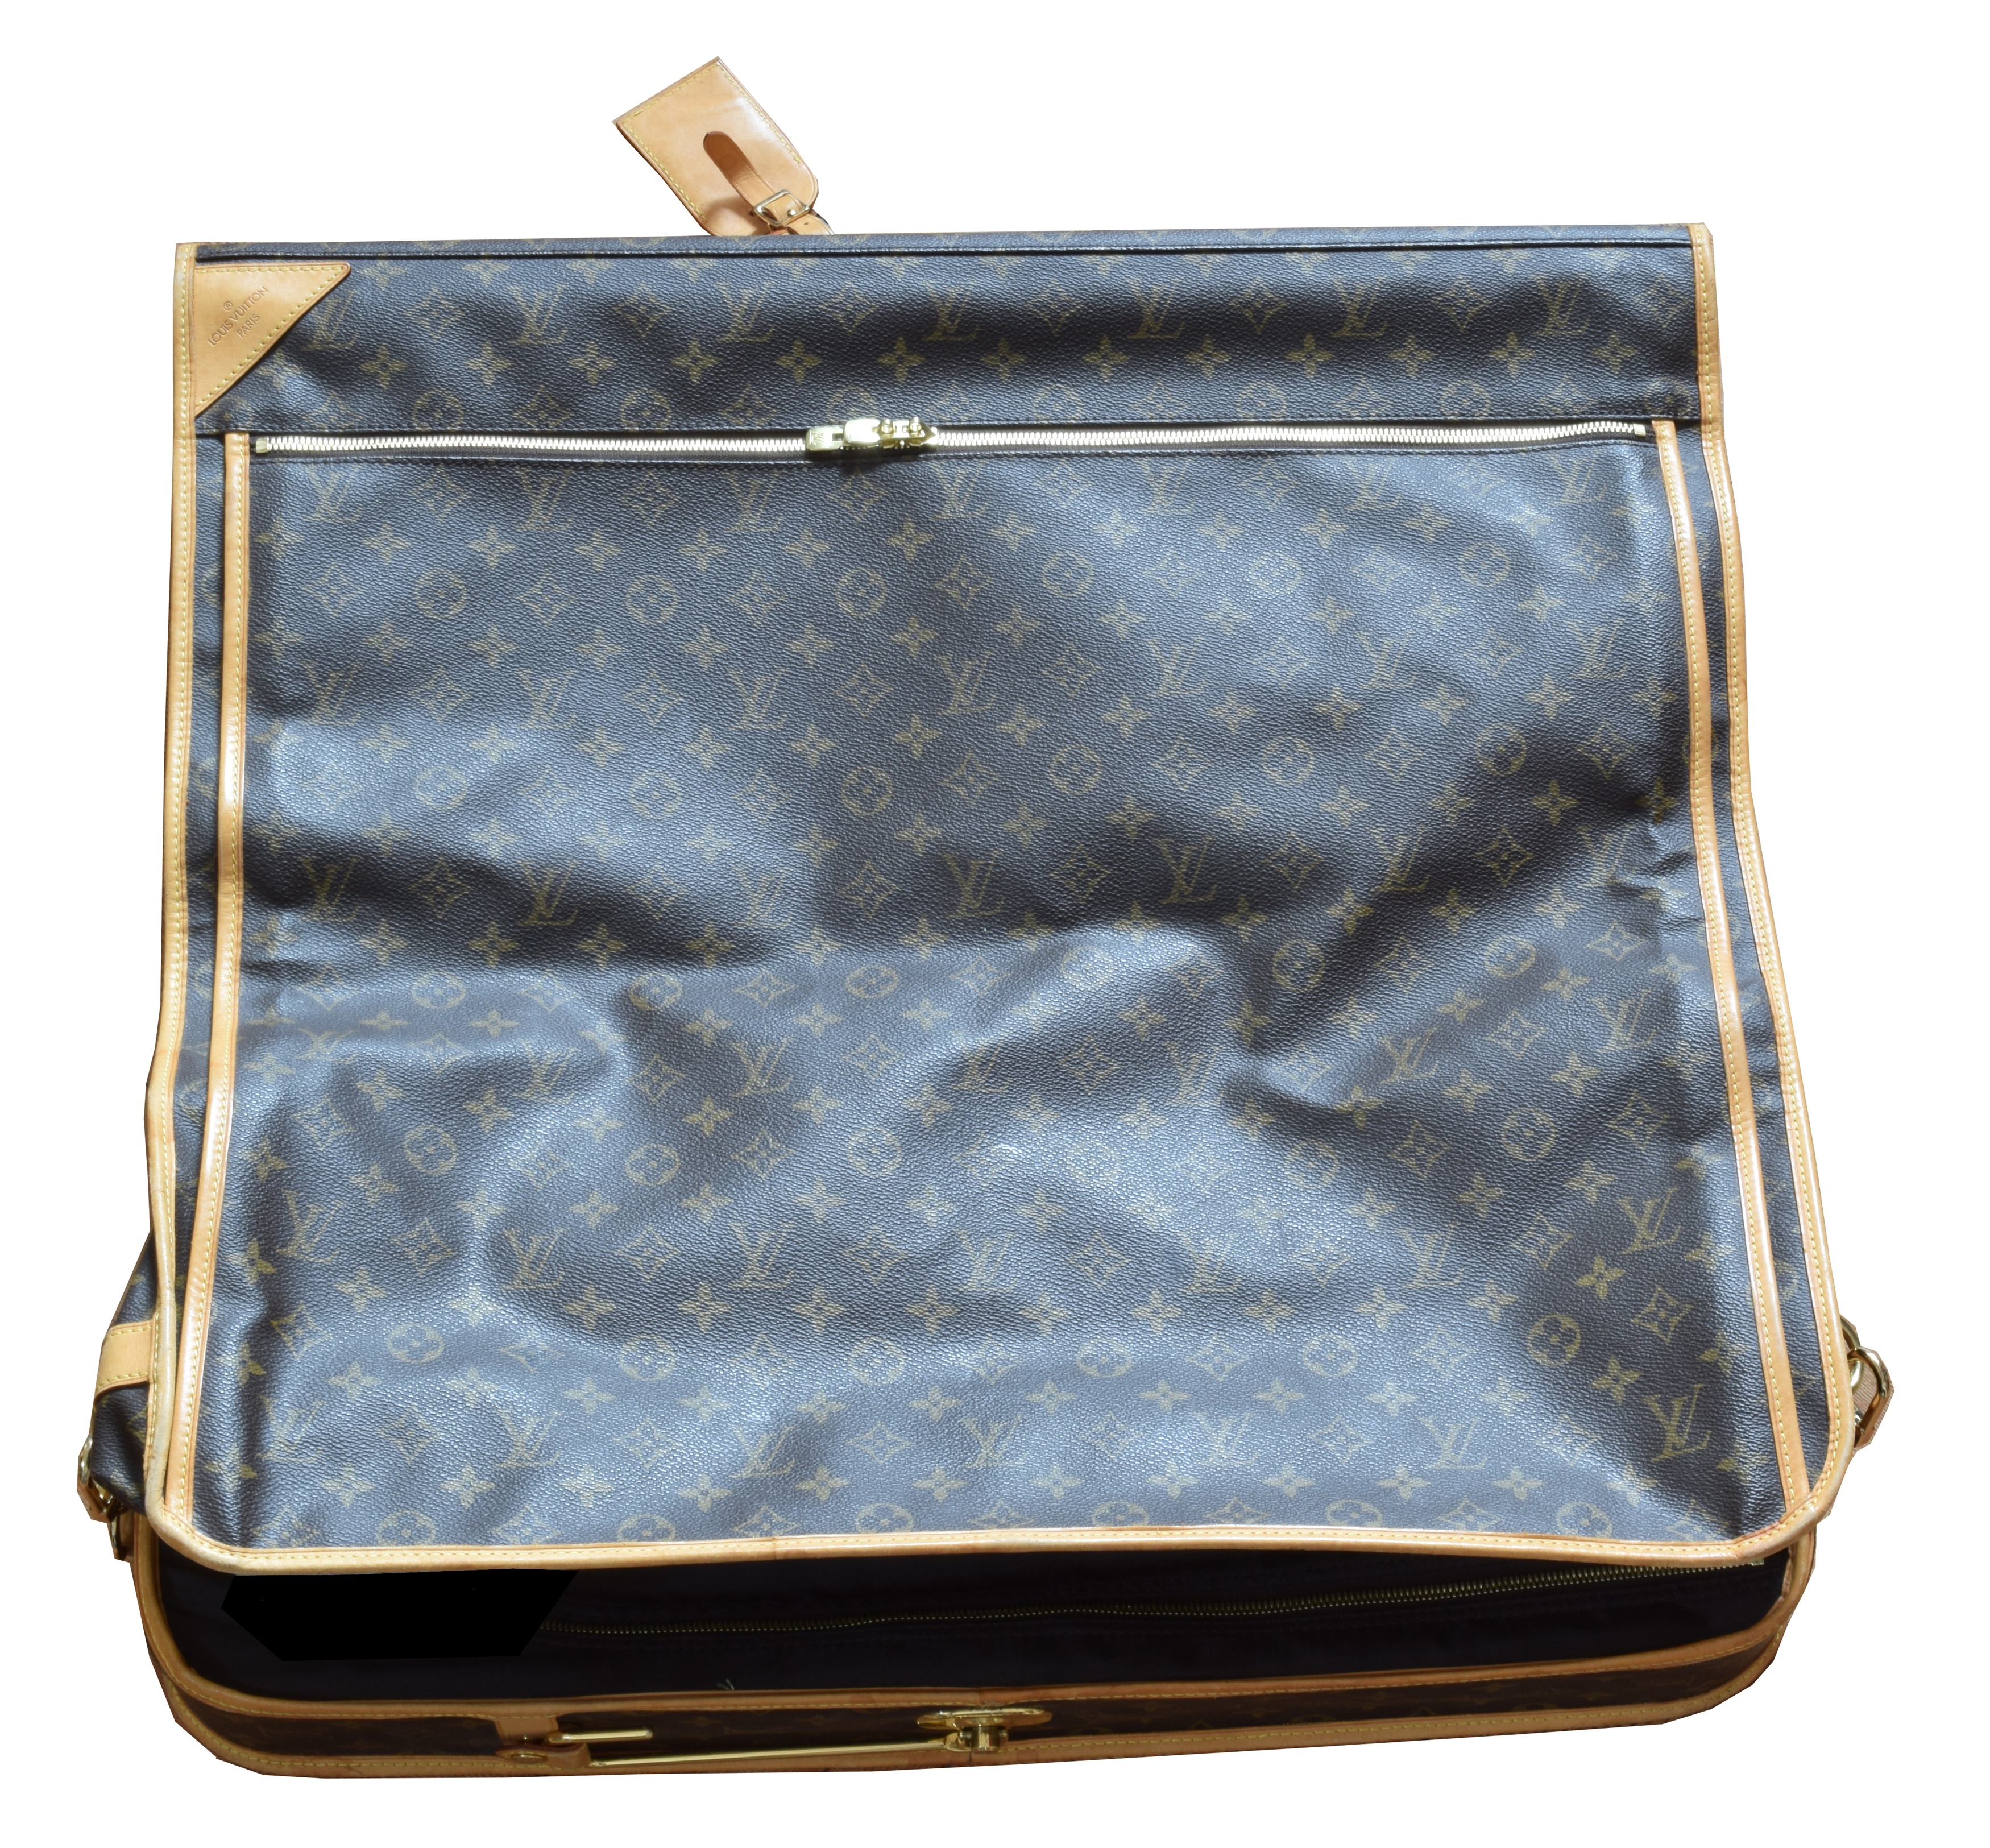 A Louis Vuitton monogram garment cover, circa 2001, the maker's monogram coated canvas with smooth leather trim, rolled vachetta leather handle, zip fastening, gold-tone hardware and luggage tag, serial no. SP1021.